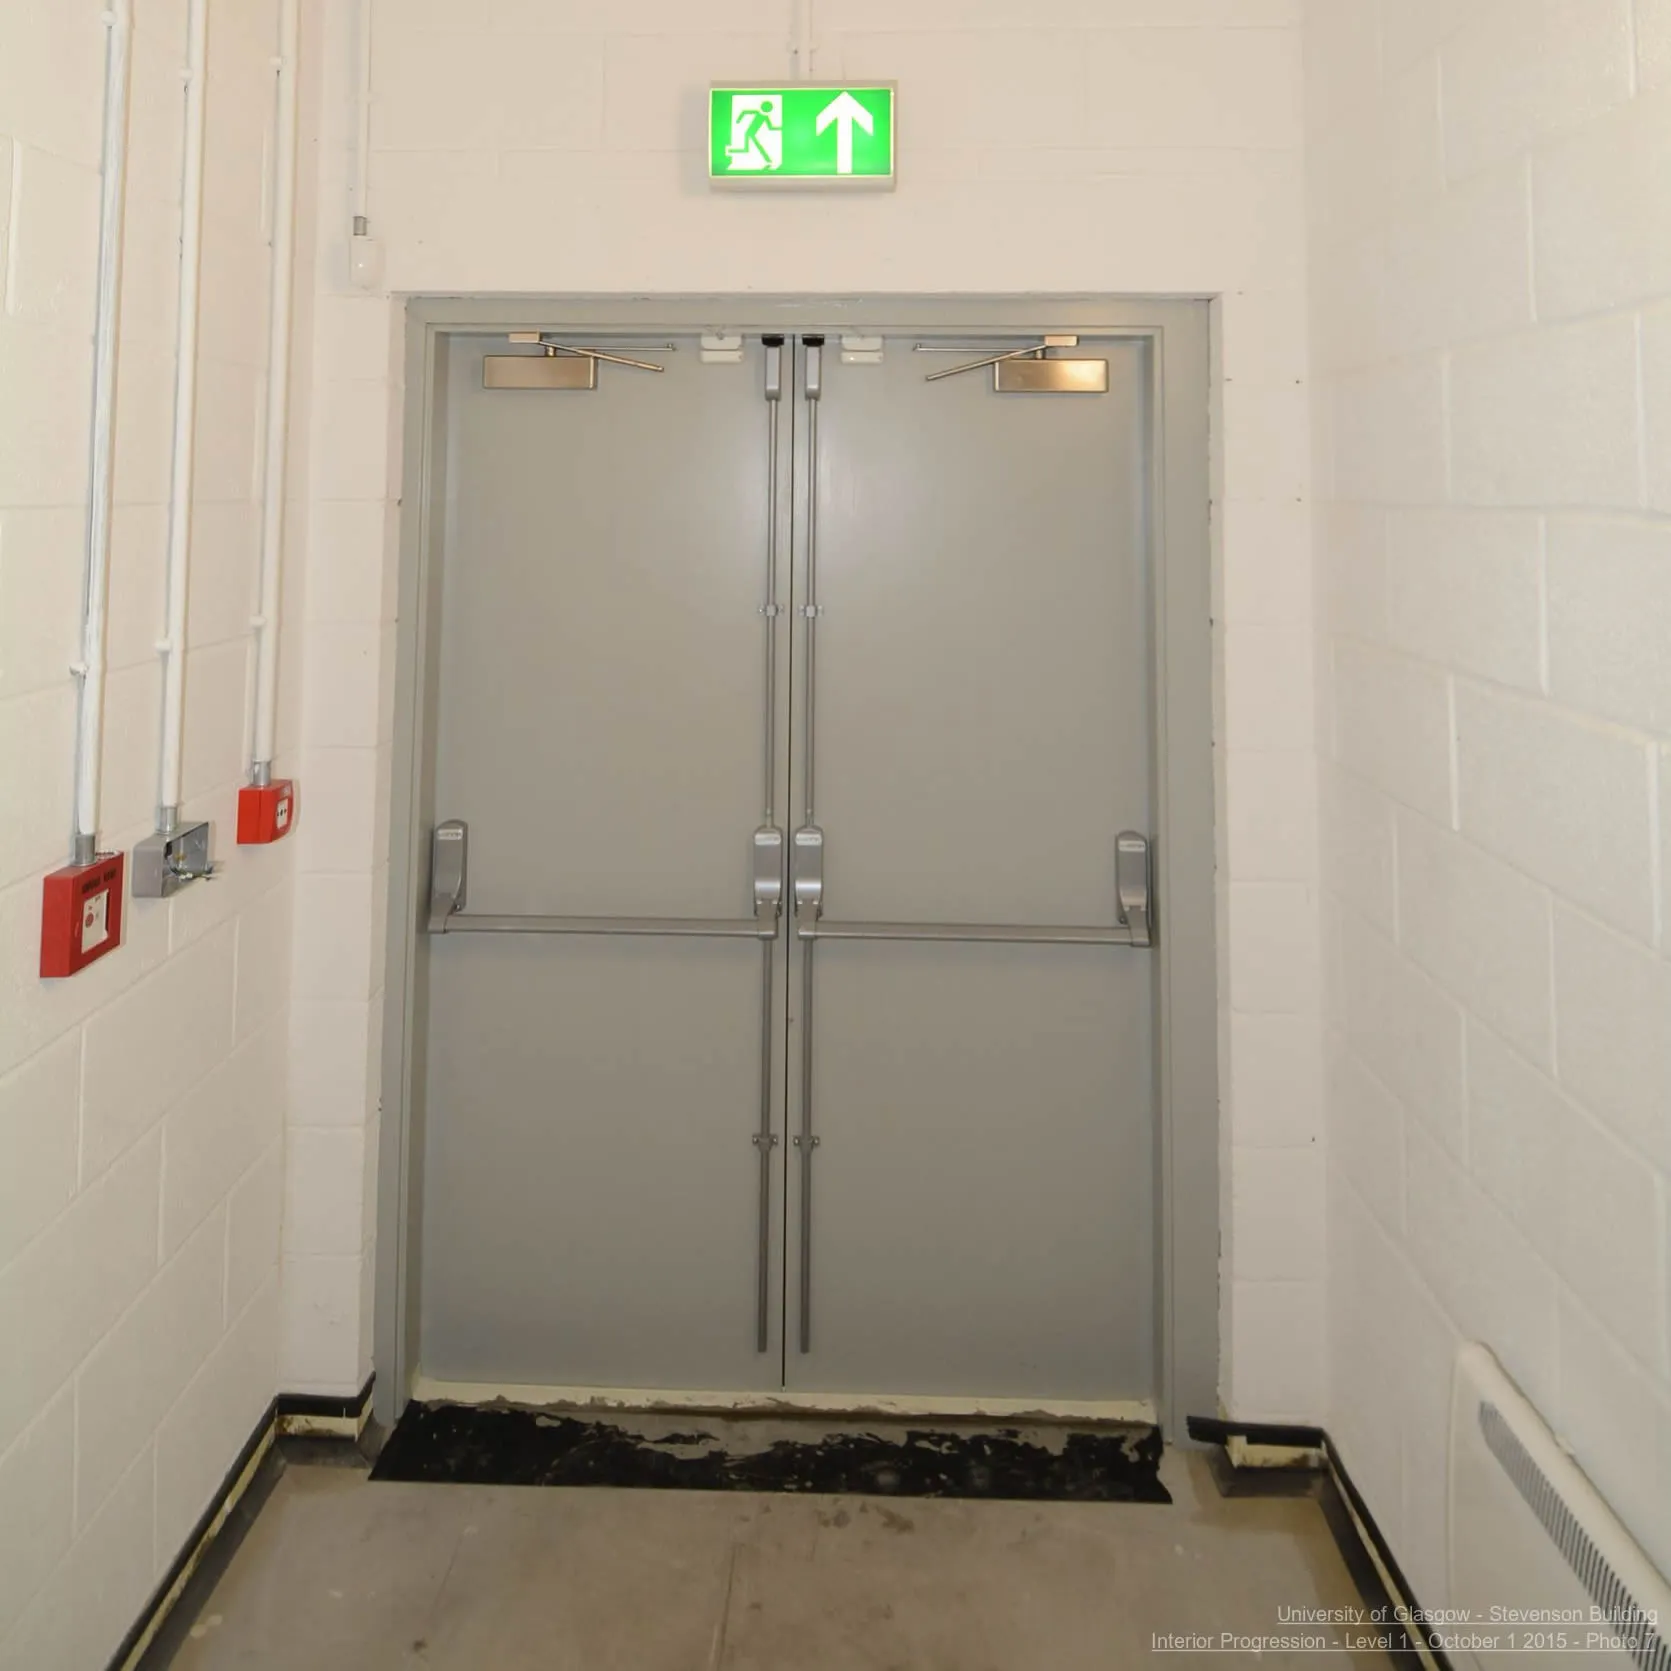 Fire doors at the end of a corridor